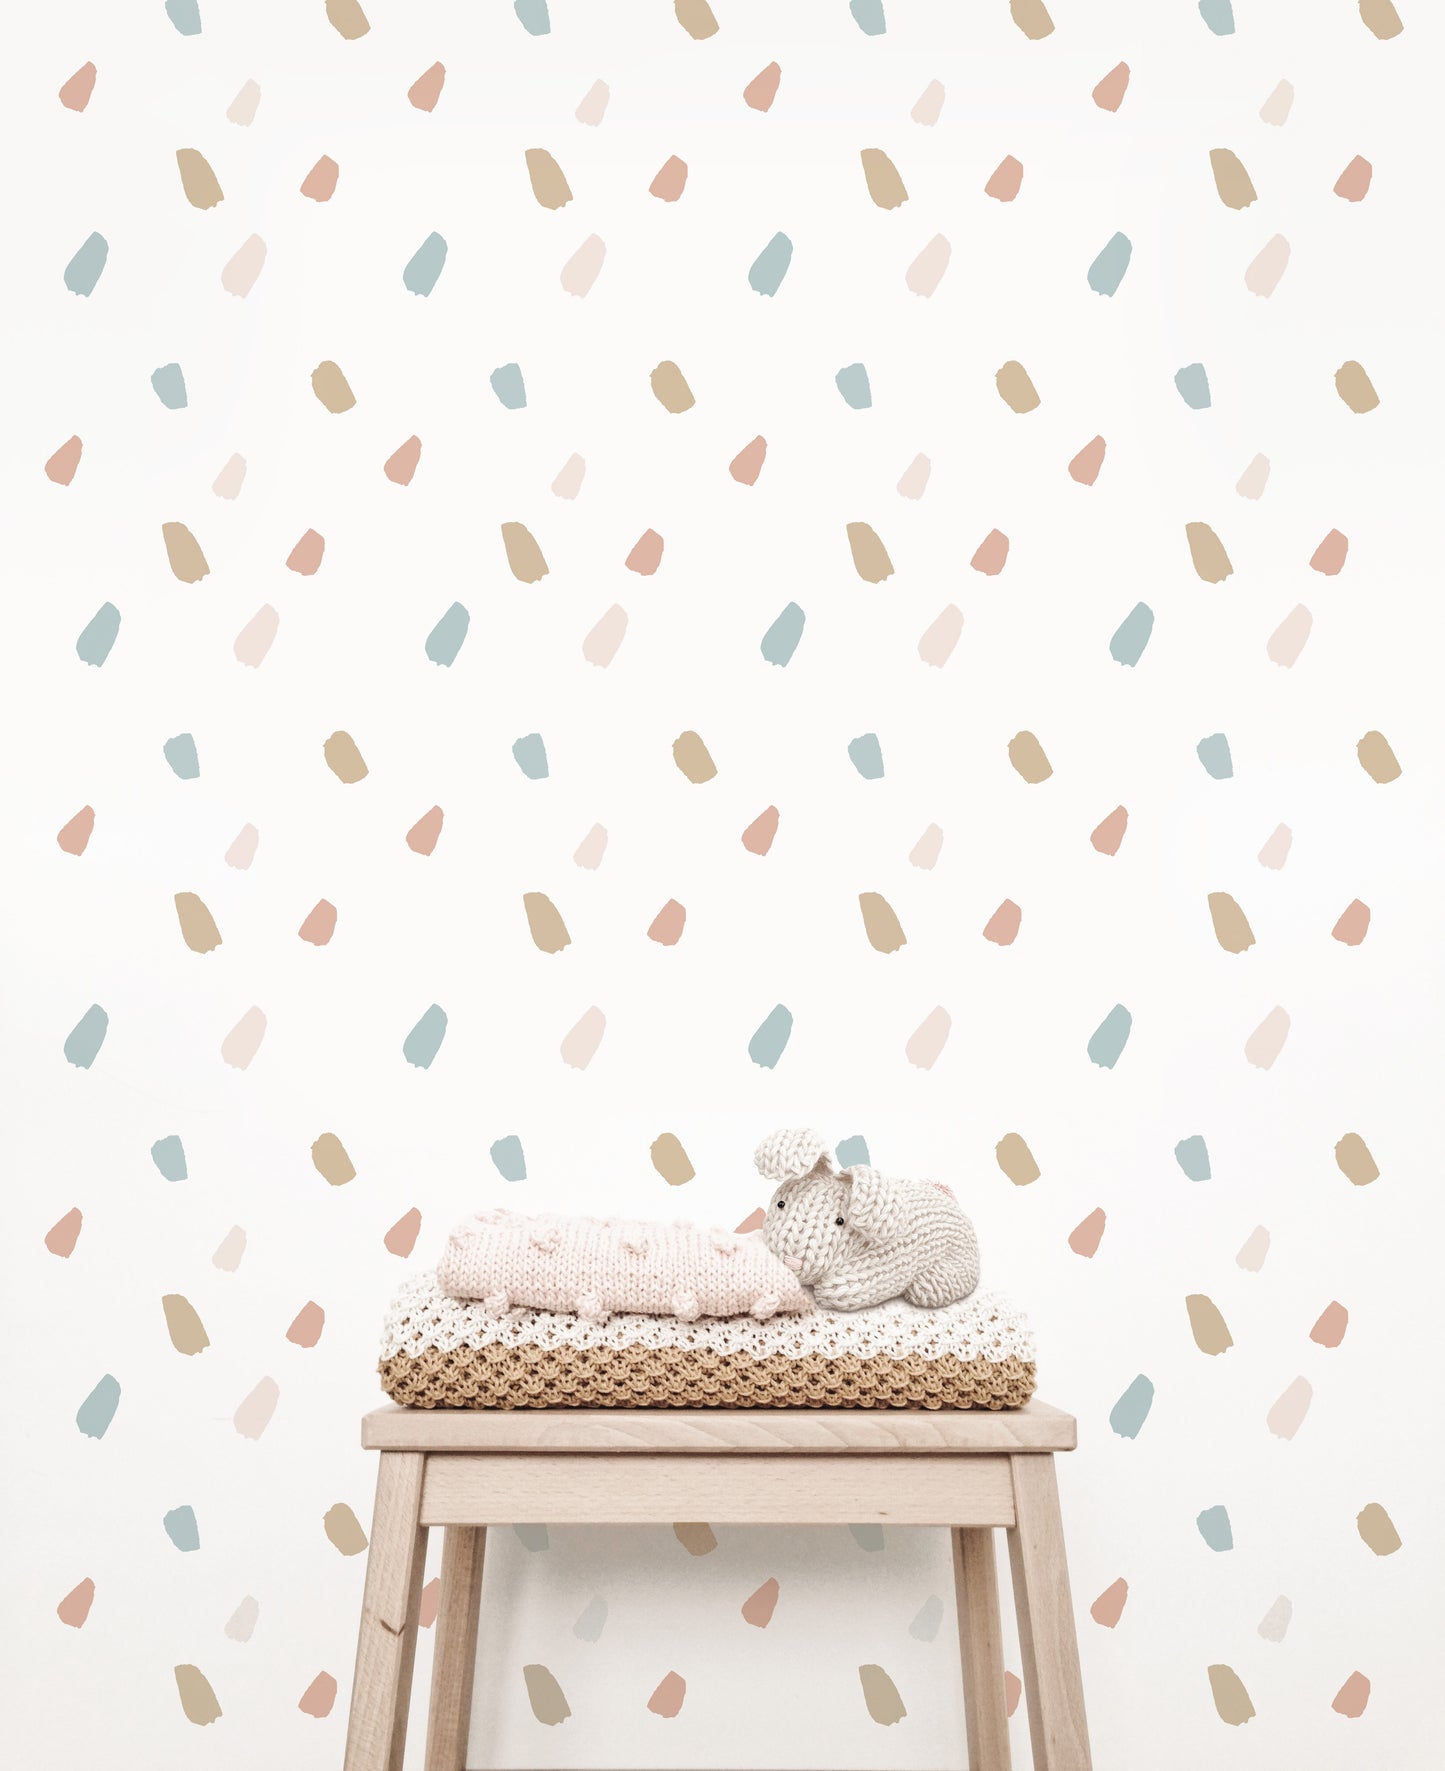 Confetti Wall Decals (Pink & Mustard) - Wall Decals - Fable and Fawn 